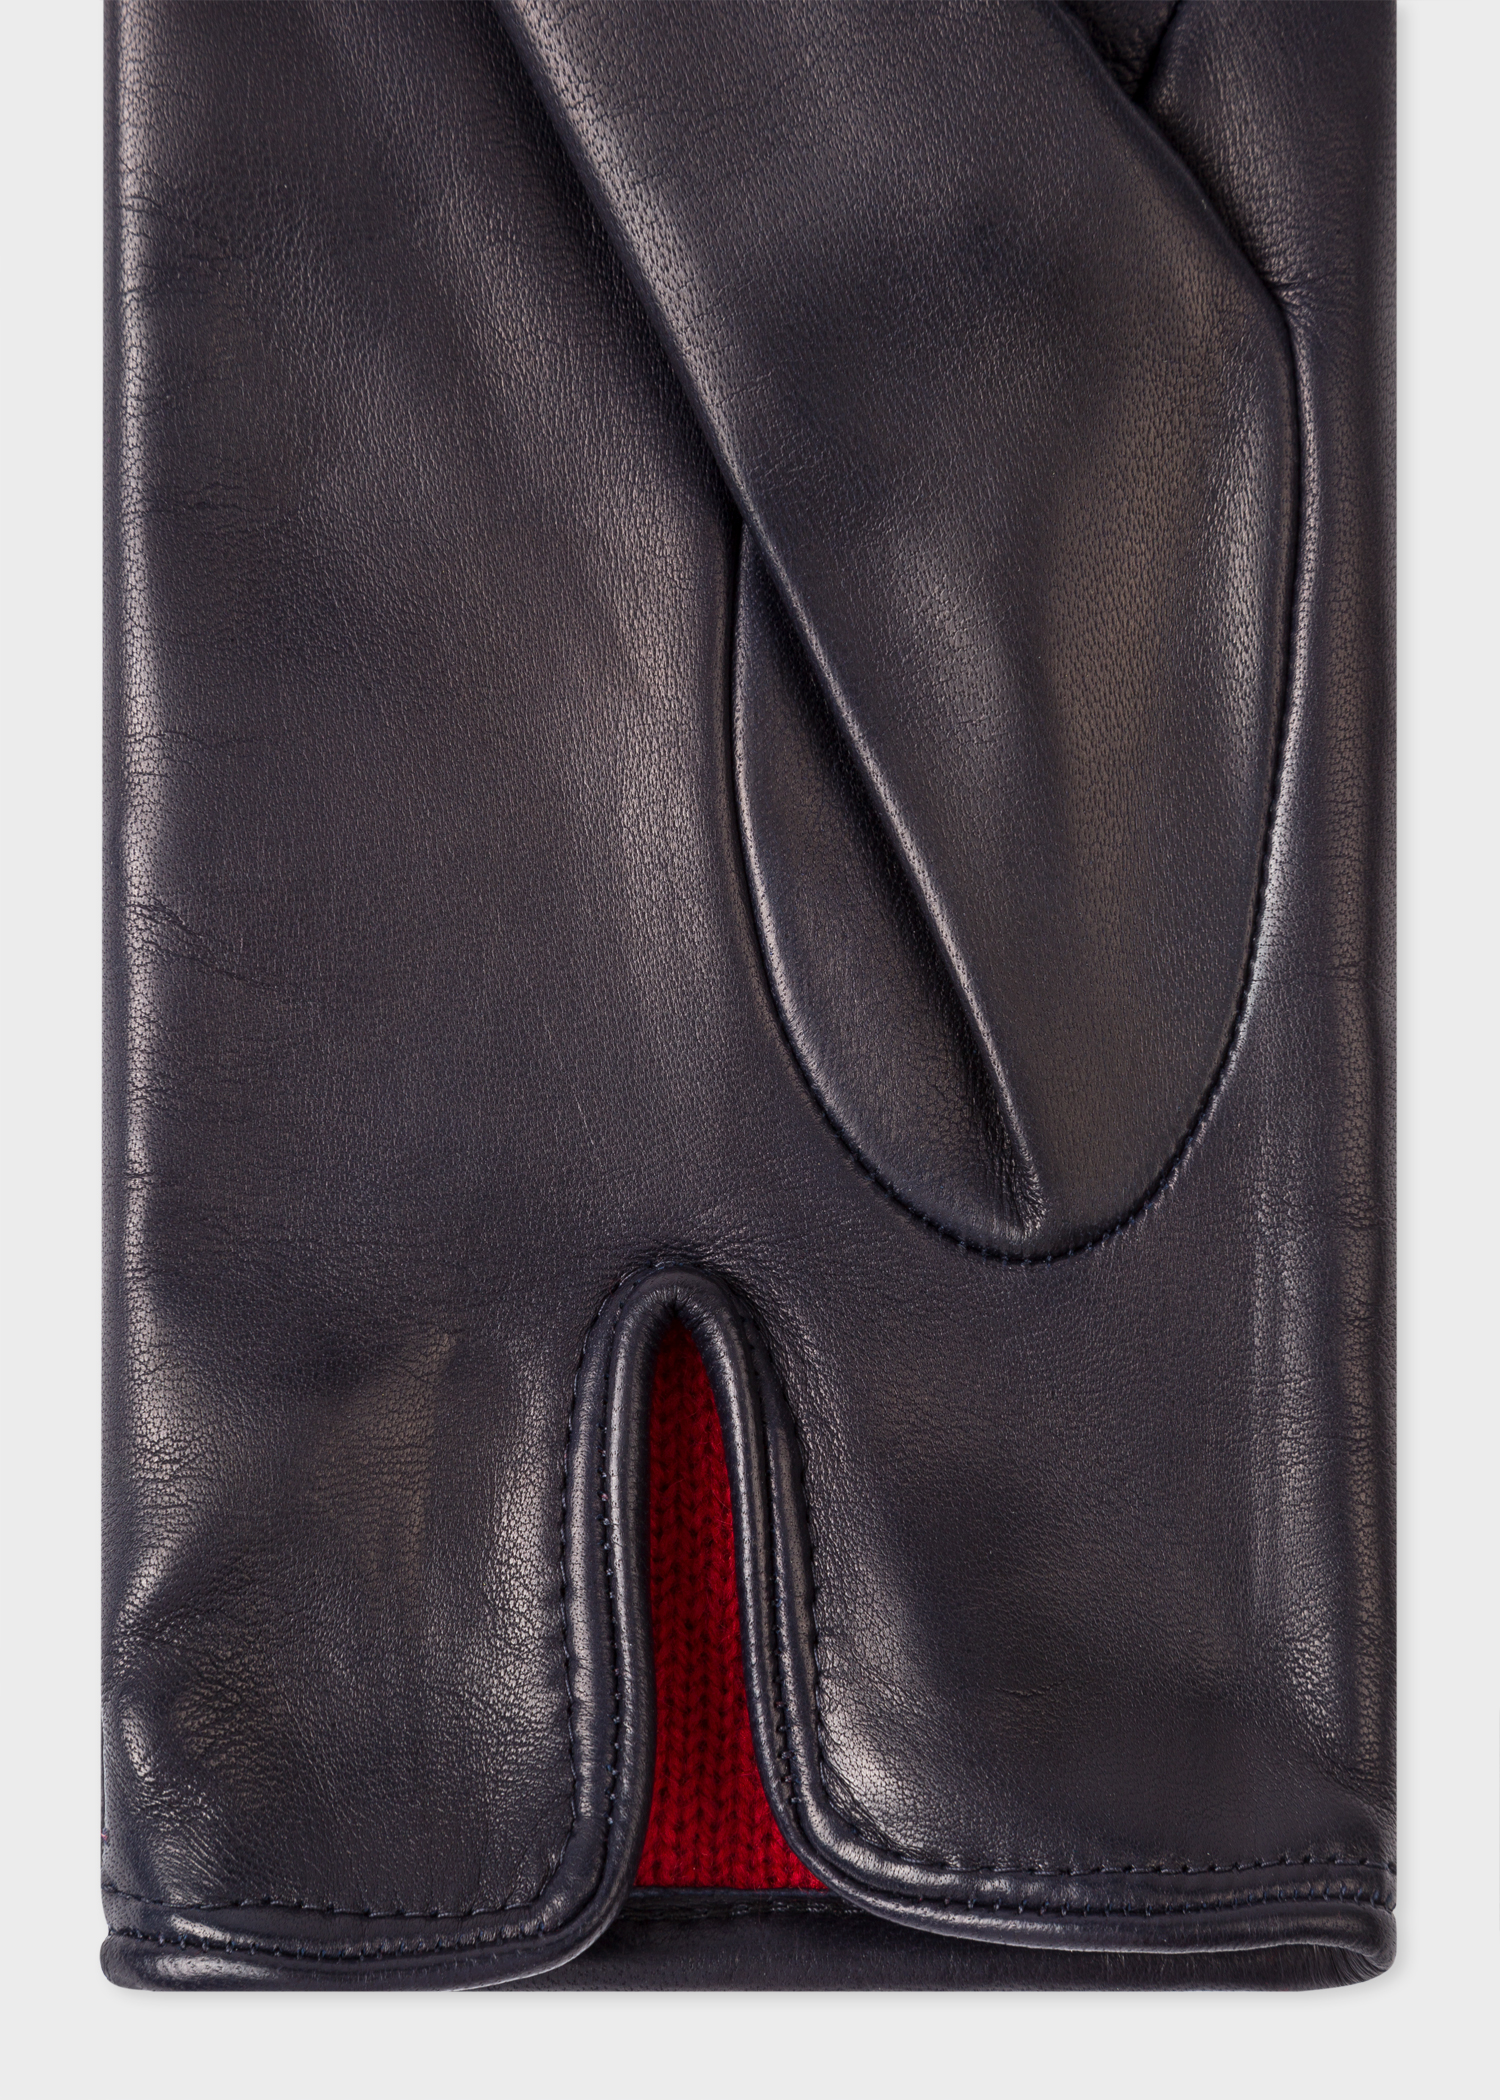 Detail view - Women's Navy Leather Gloves With 'Swirl' Stitching Details Paul Smith